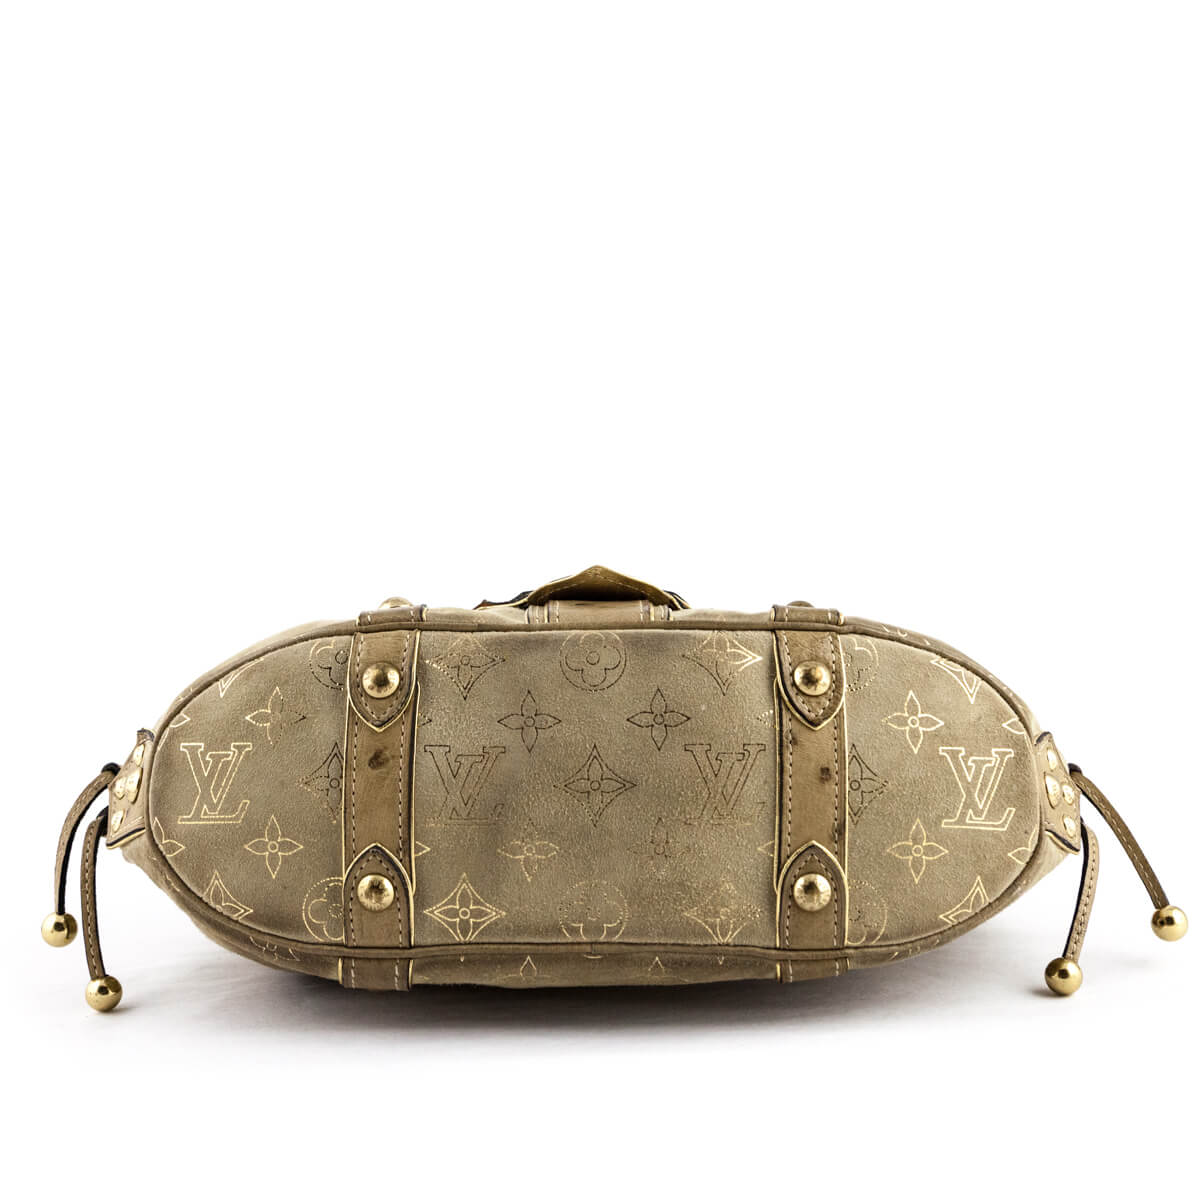 SOLD! LOUIS VUITTON Suede Ostrich Theda GM Bag